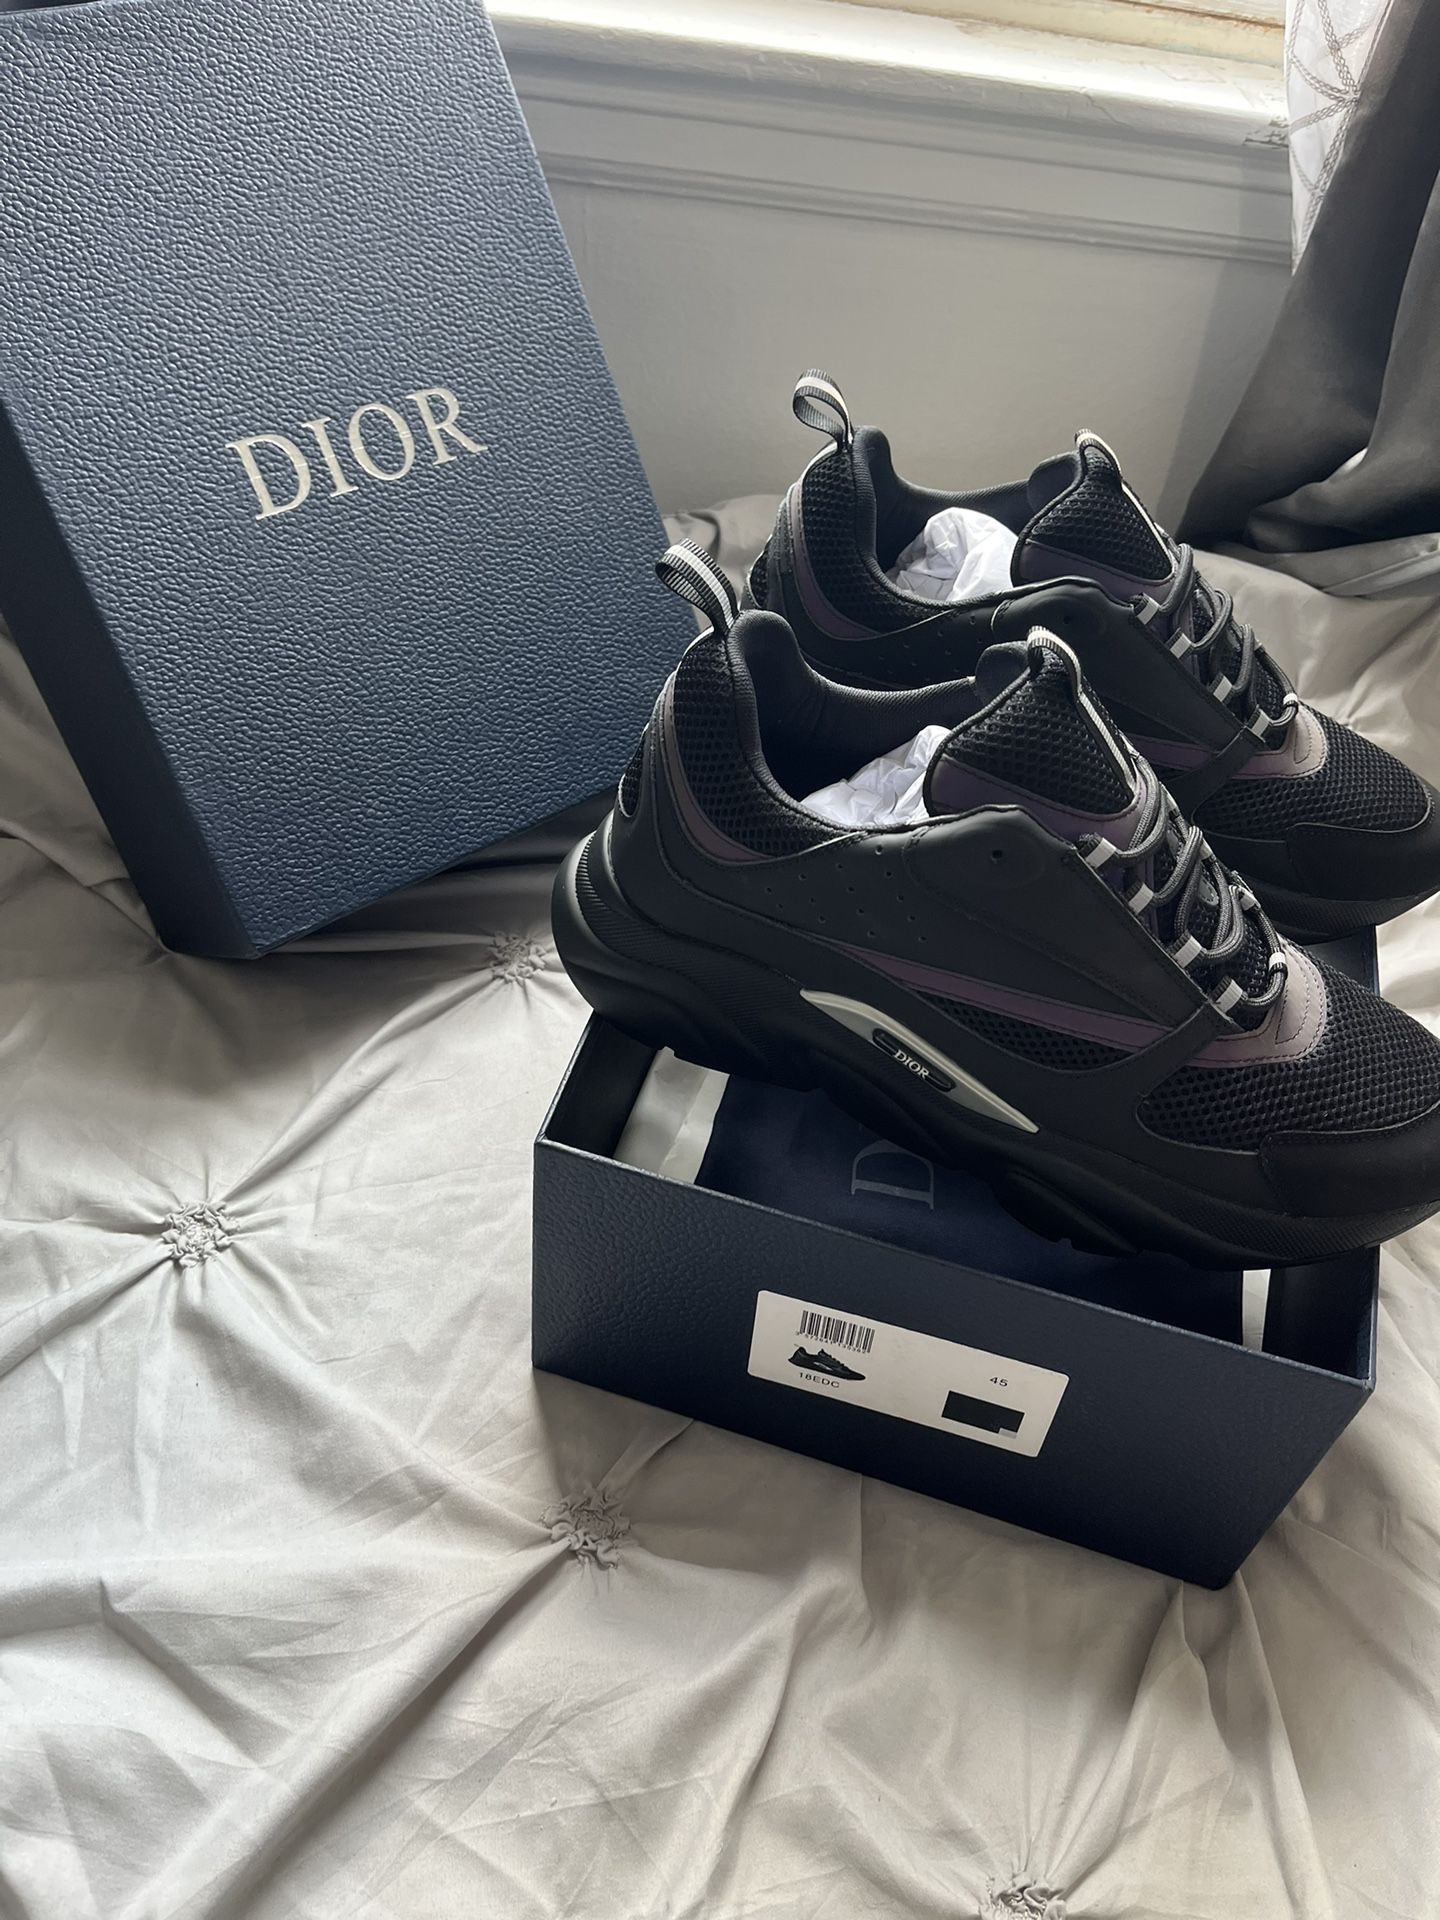 dior b22 iridescent reflective for Sale in Philadelphia, PA - OfferUp